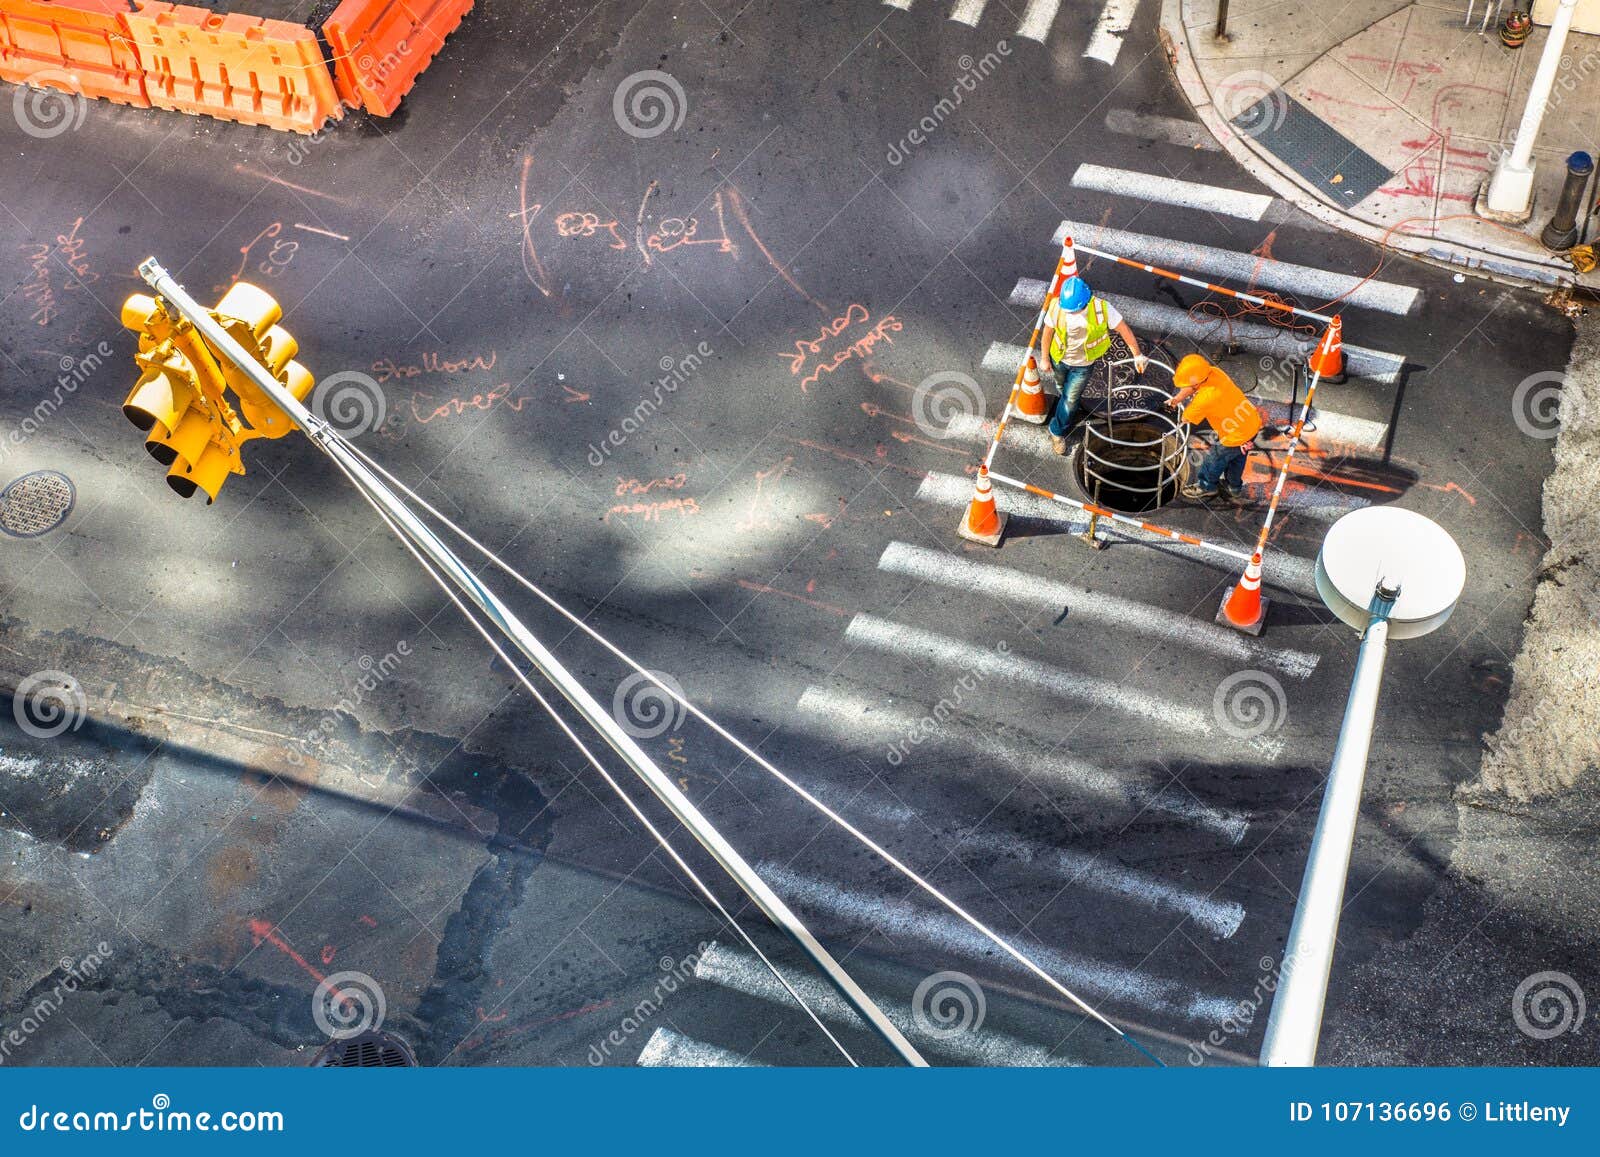 street scene with utility workers